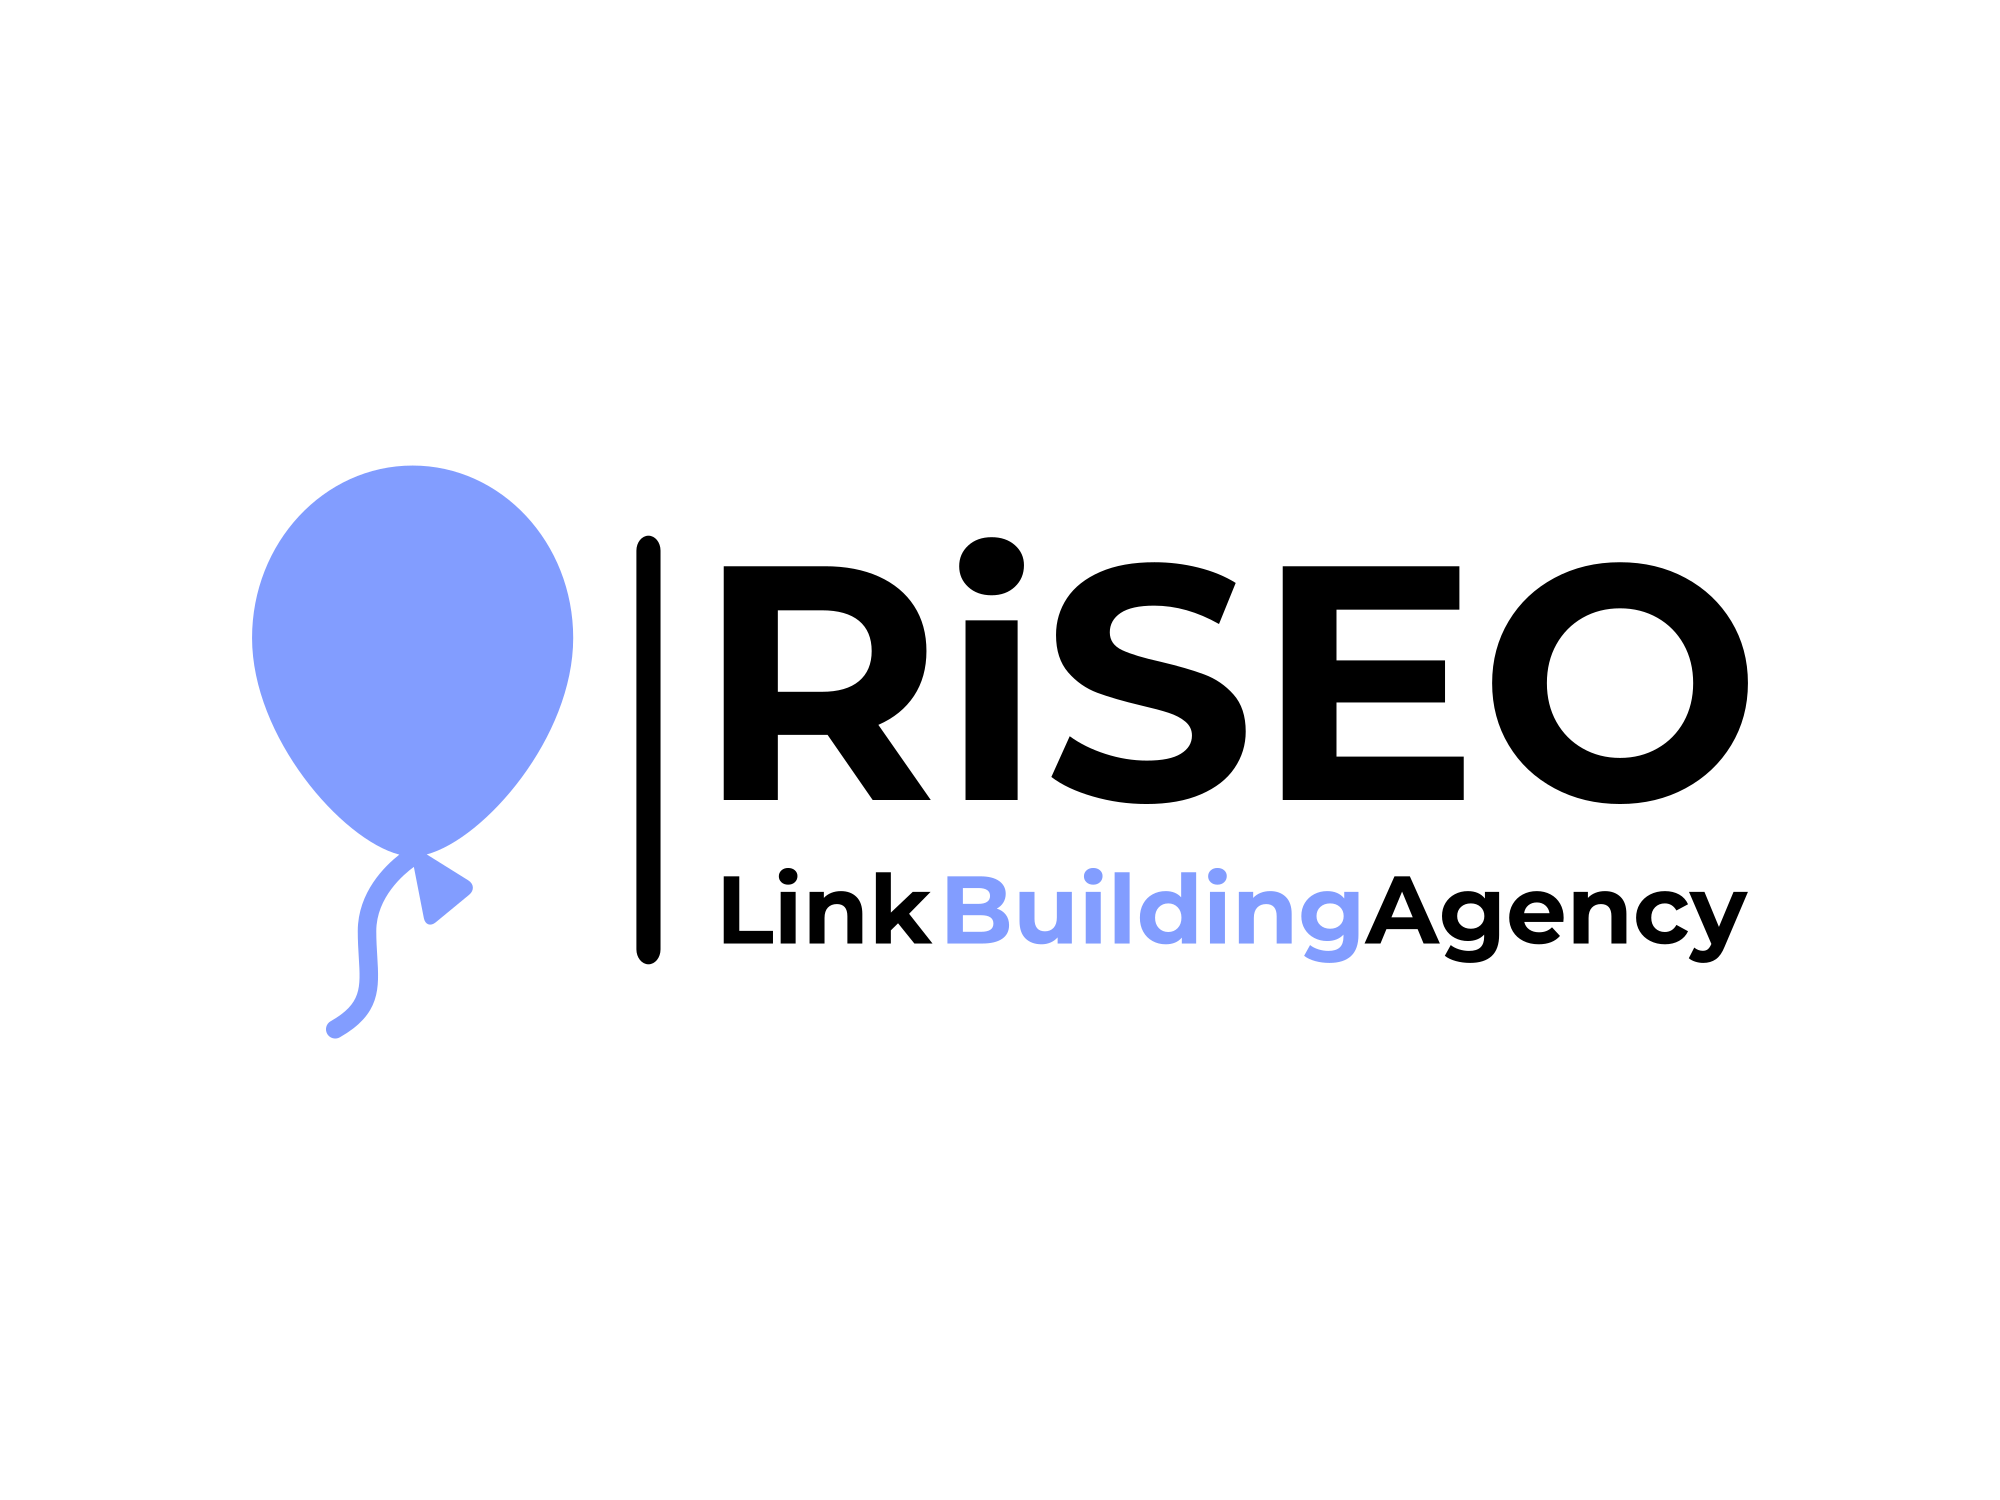 Logo of RiSEO Link Building Agency